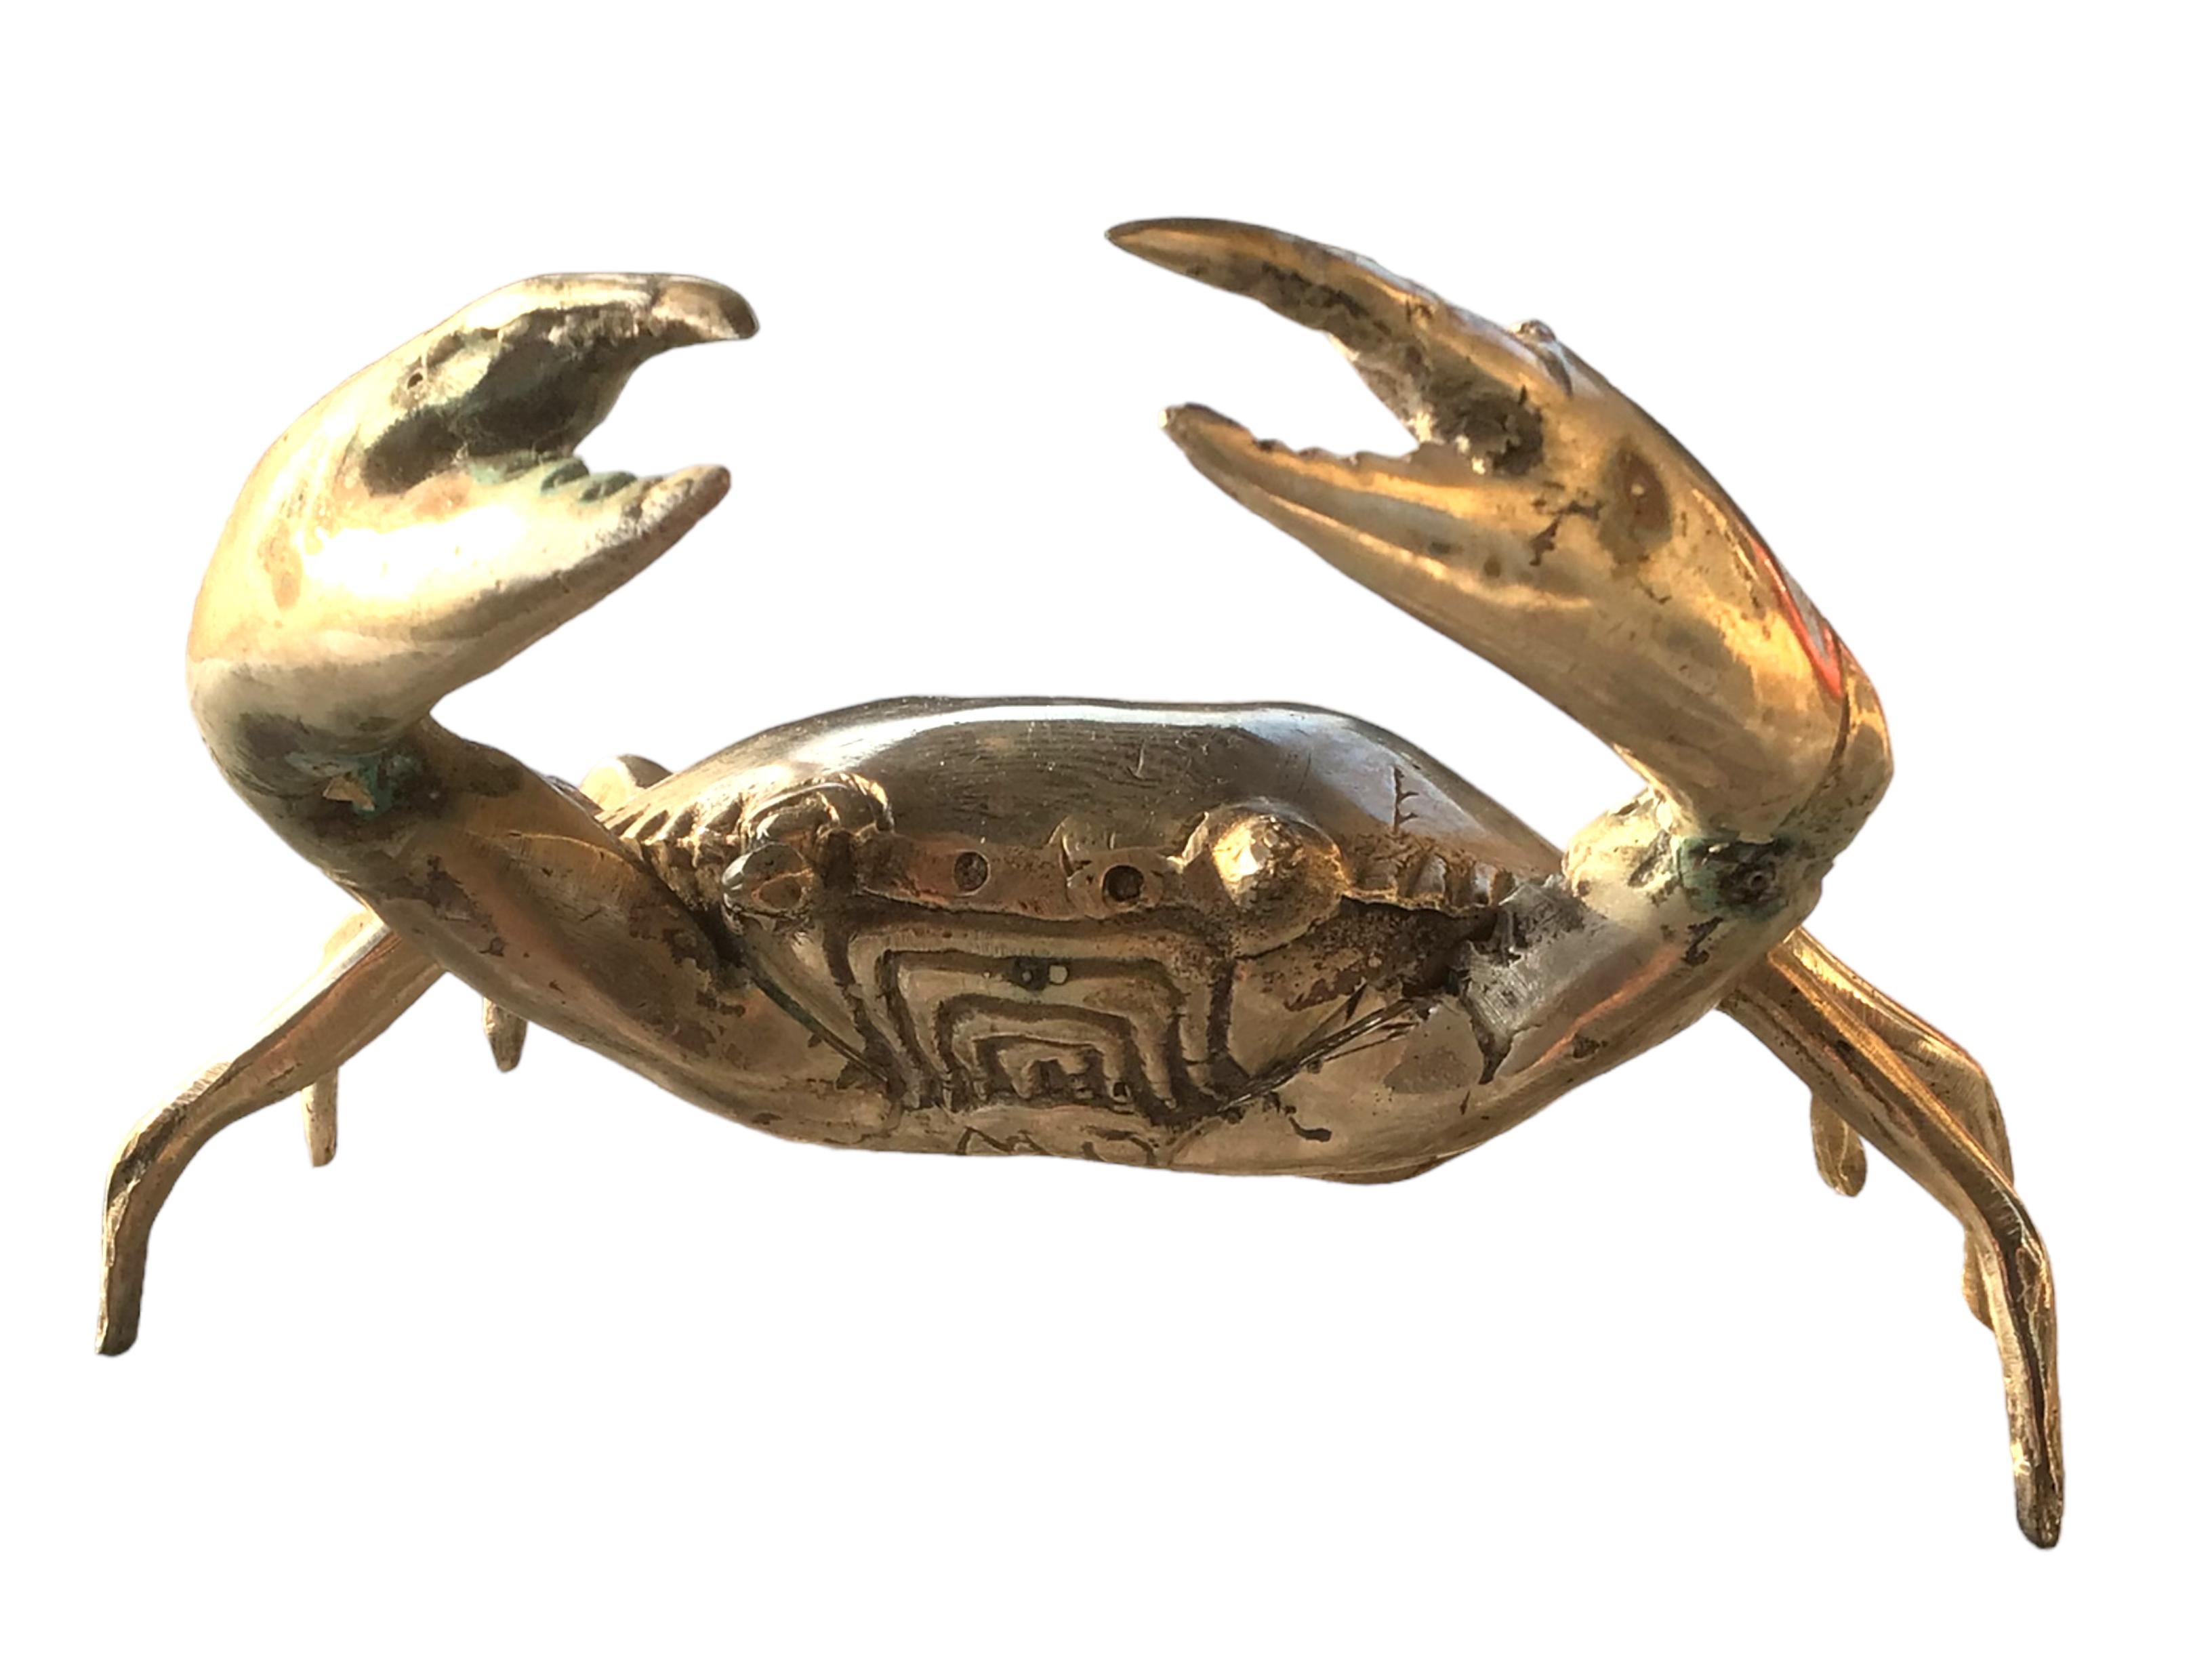 This nickel plated metal crab statue was most likely made in the 1980s in Italy. Can not tell the maker or the artist, but it is signed MD. This particular crab statue is a beautiful piece, it can be displayed as a sculptural focal point on a